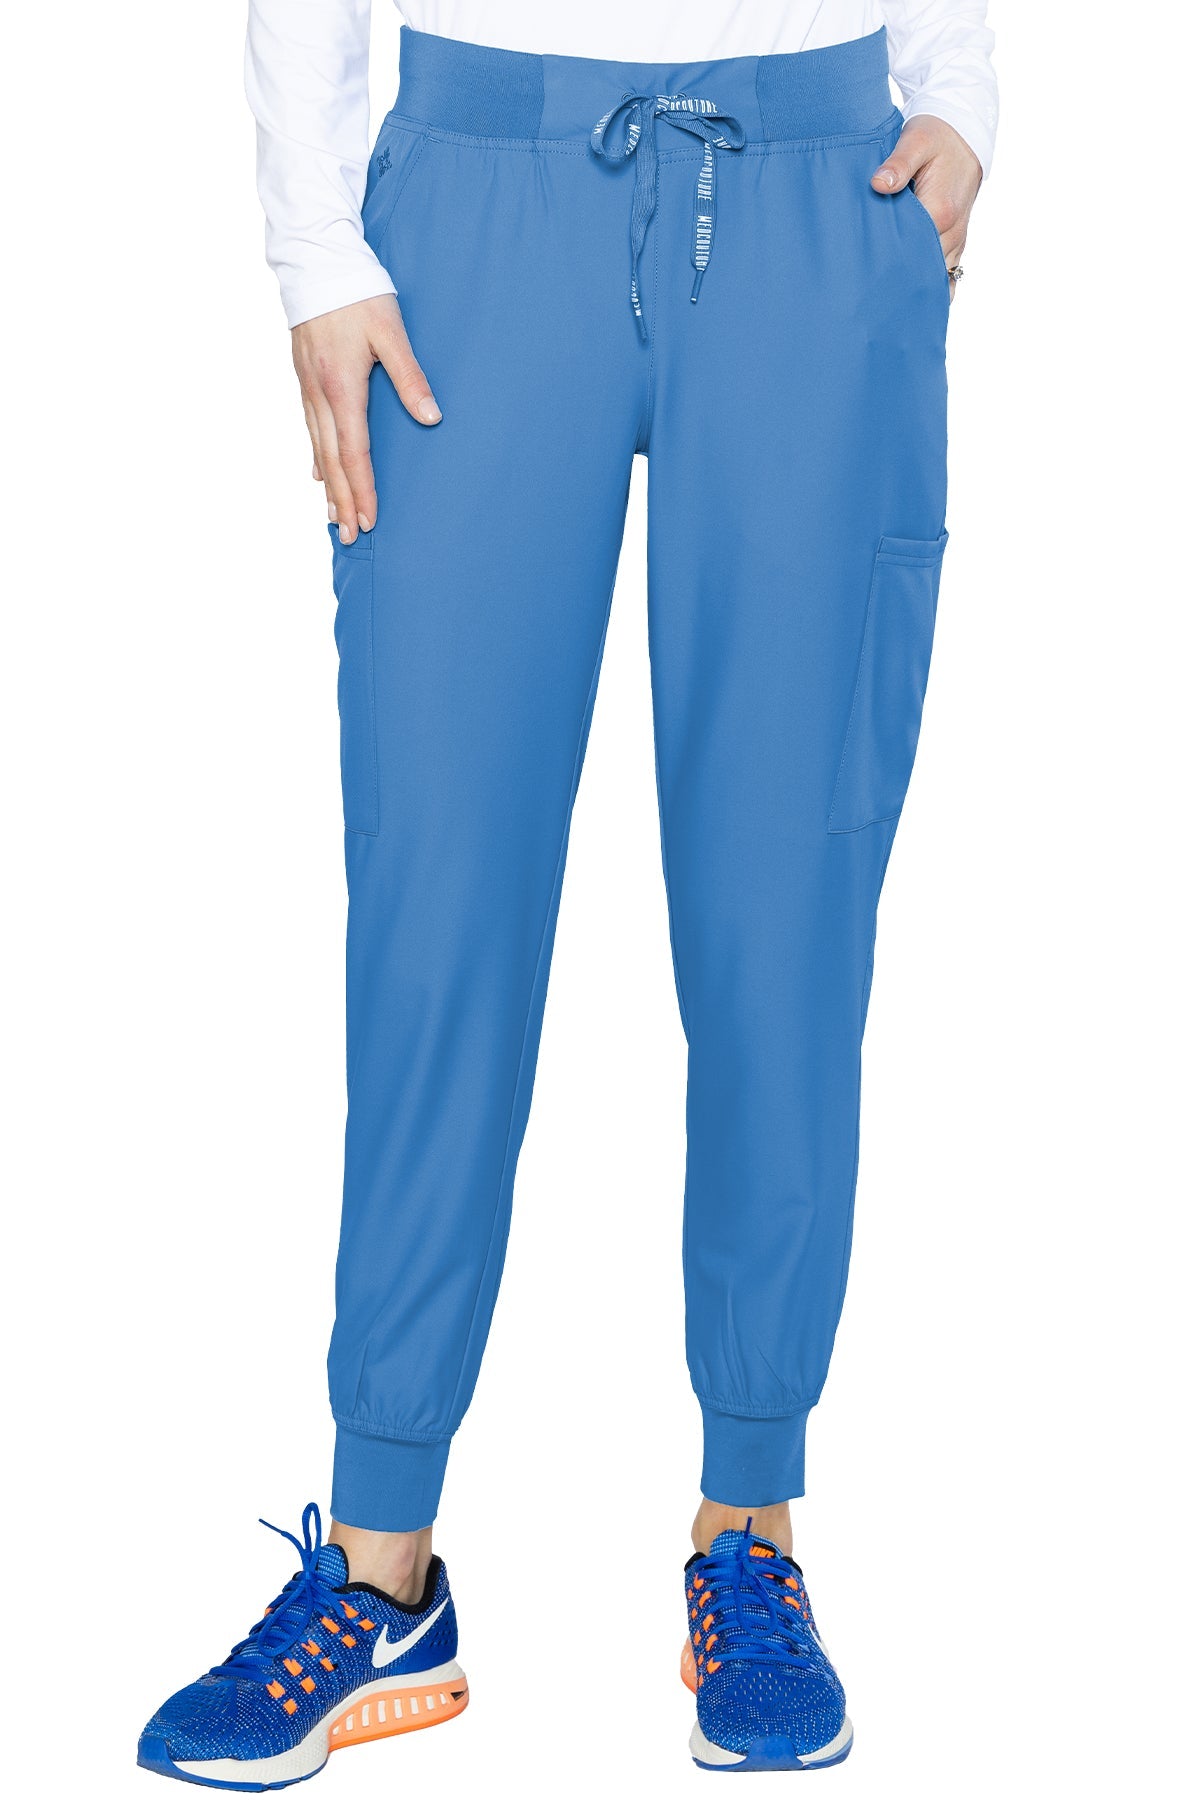 Med Couture Petite Scrub Pants Insight Jogger Pant in Ceil at Parker's Clothing and Shoes.